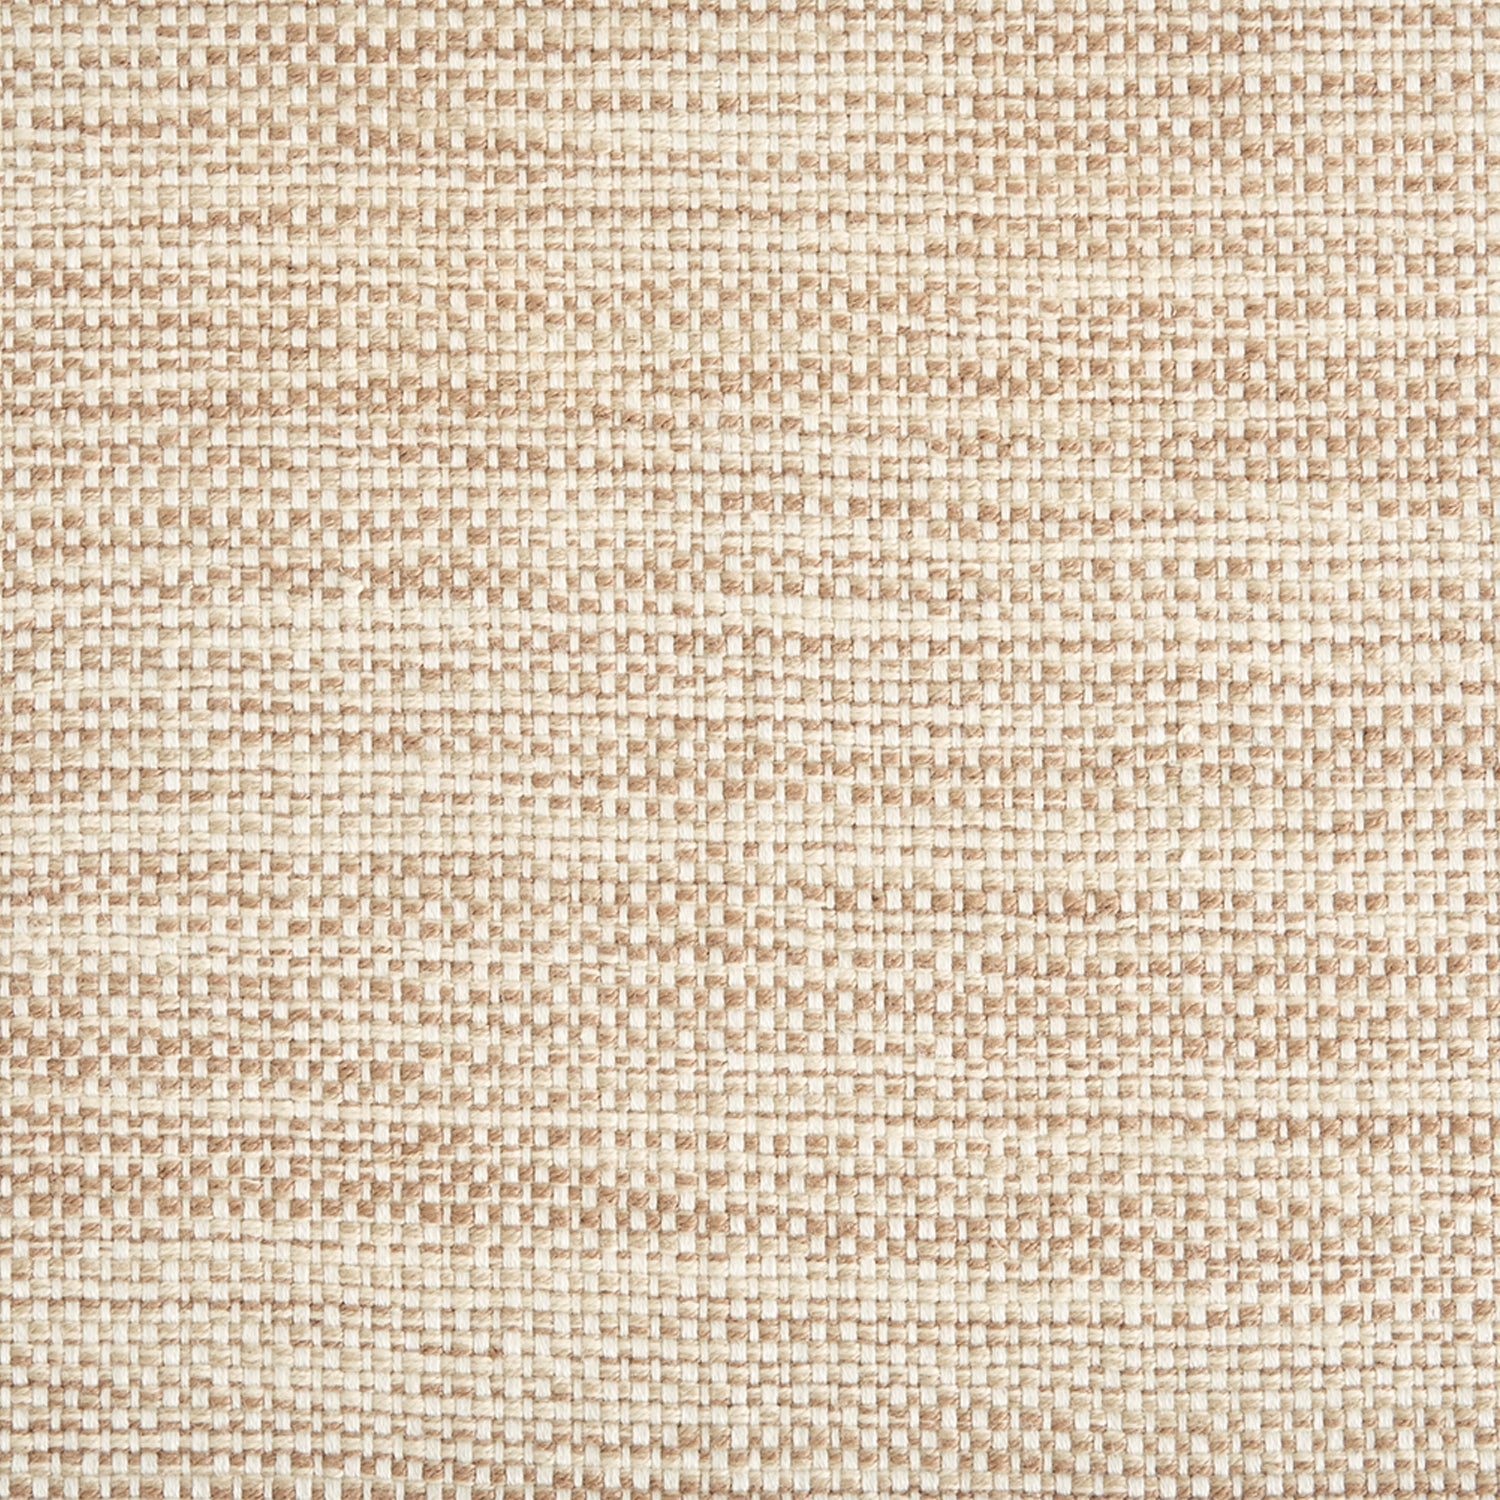 Outdoor broadloom carpet swatch in a chunky grid weave in mottled cream and tan.